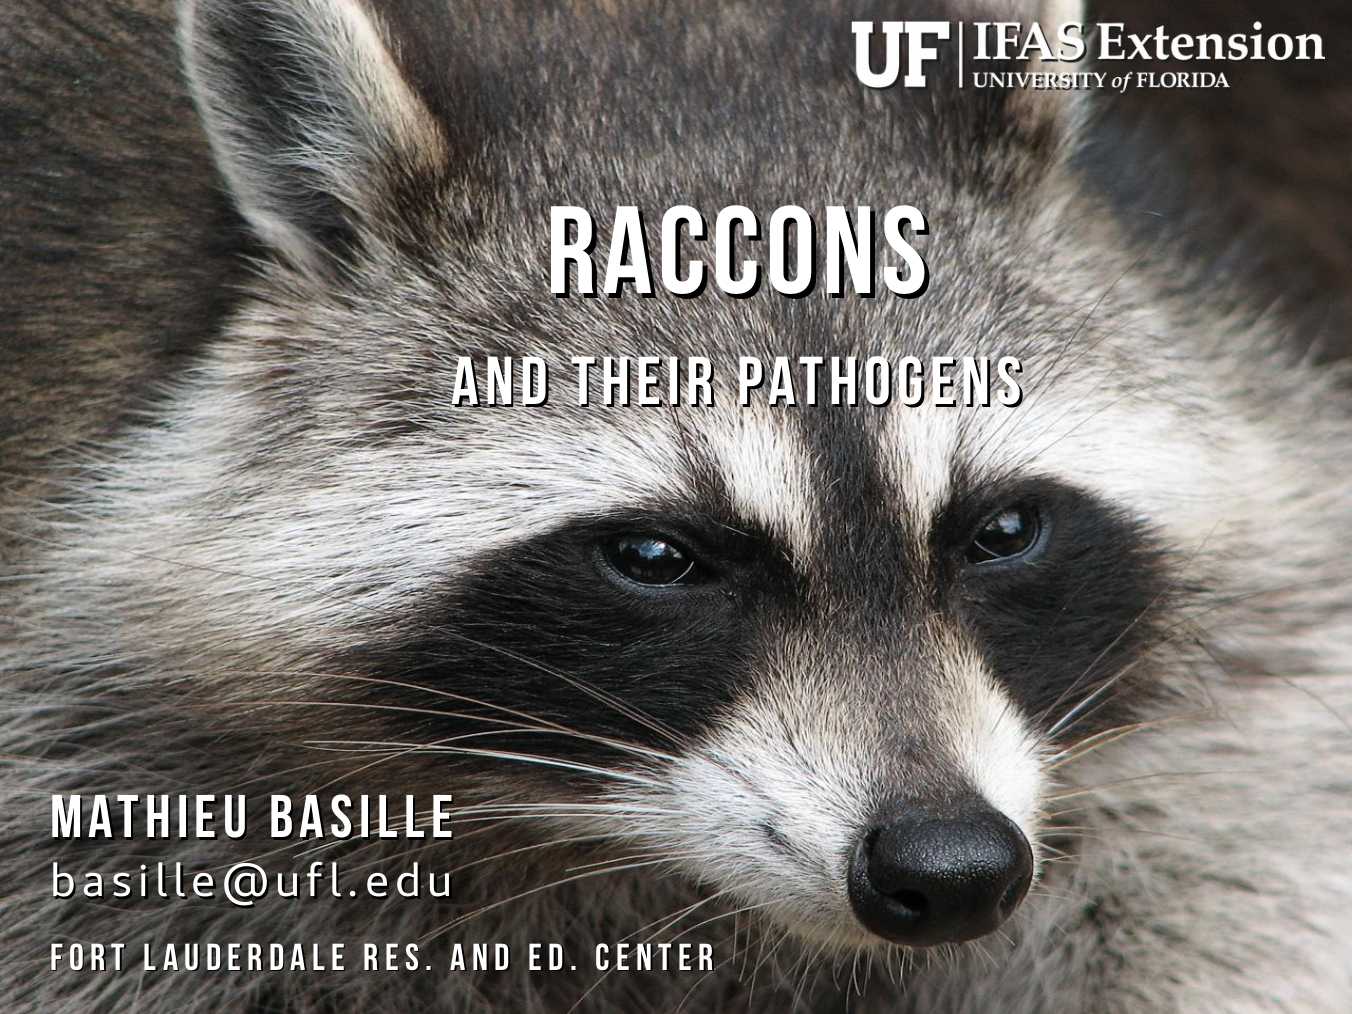 Raccoons and their pathogens.